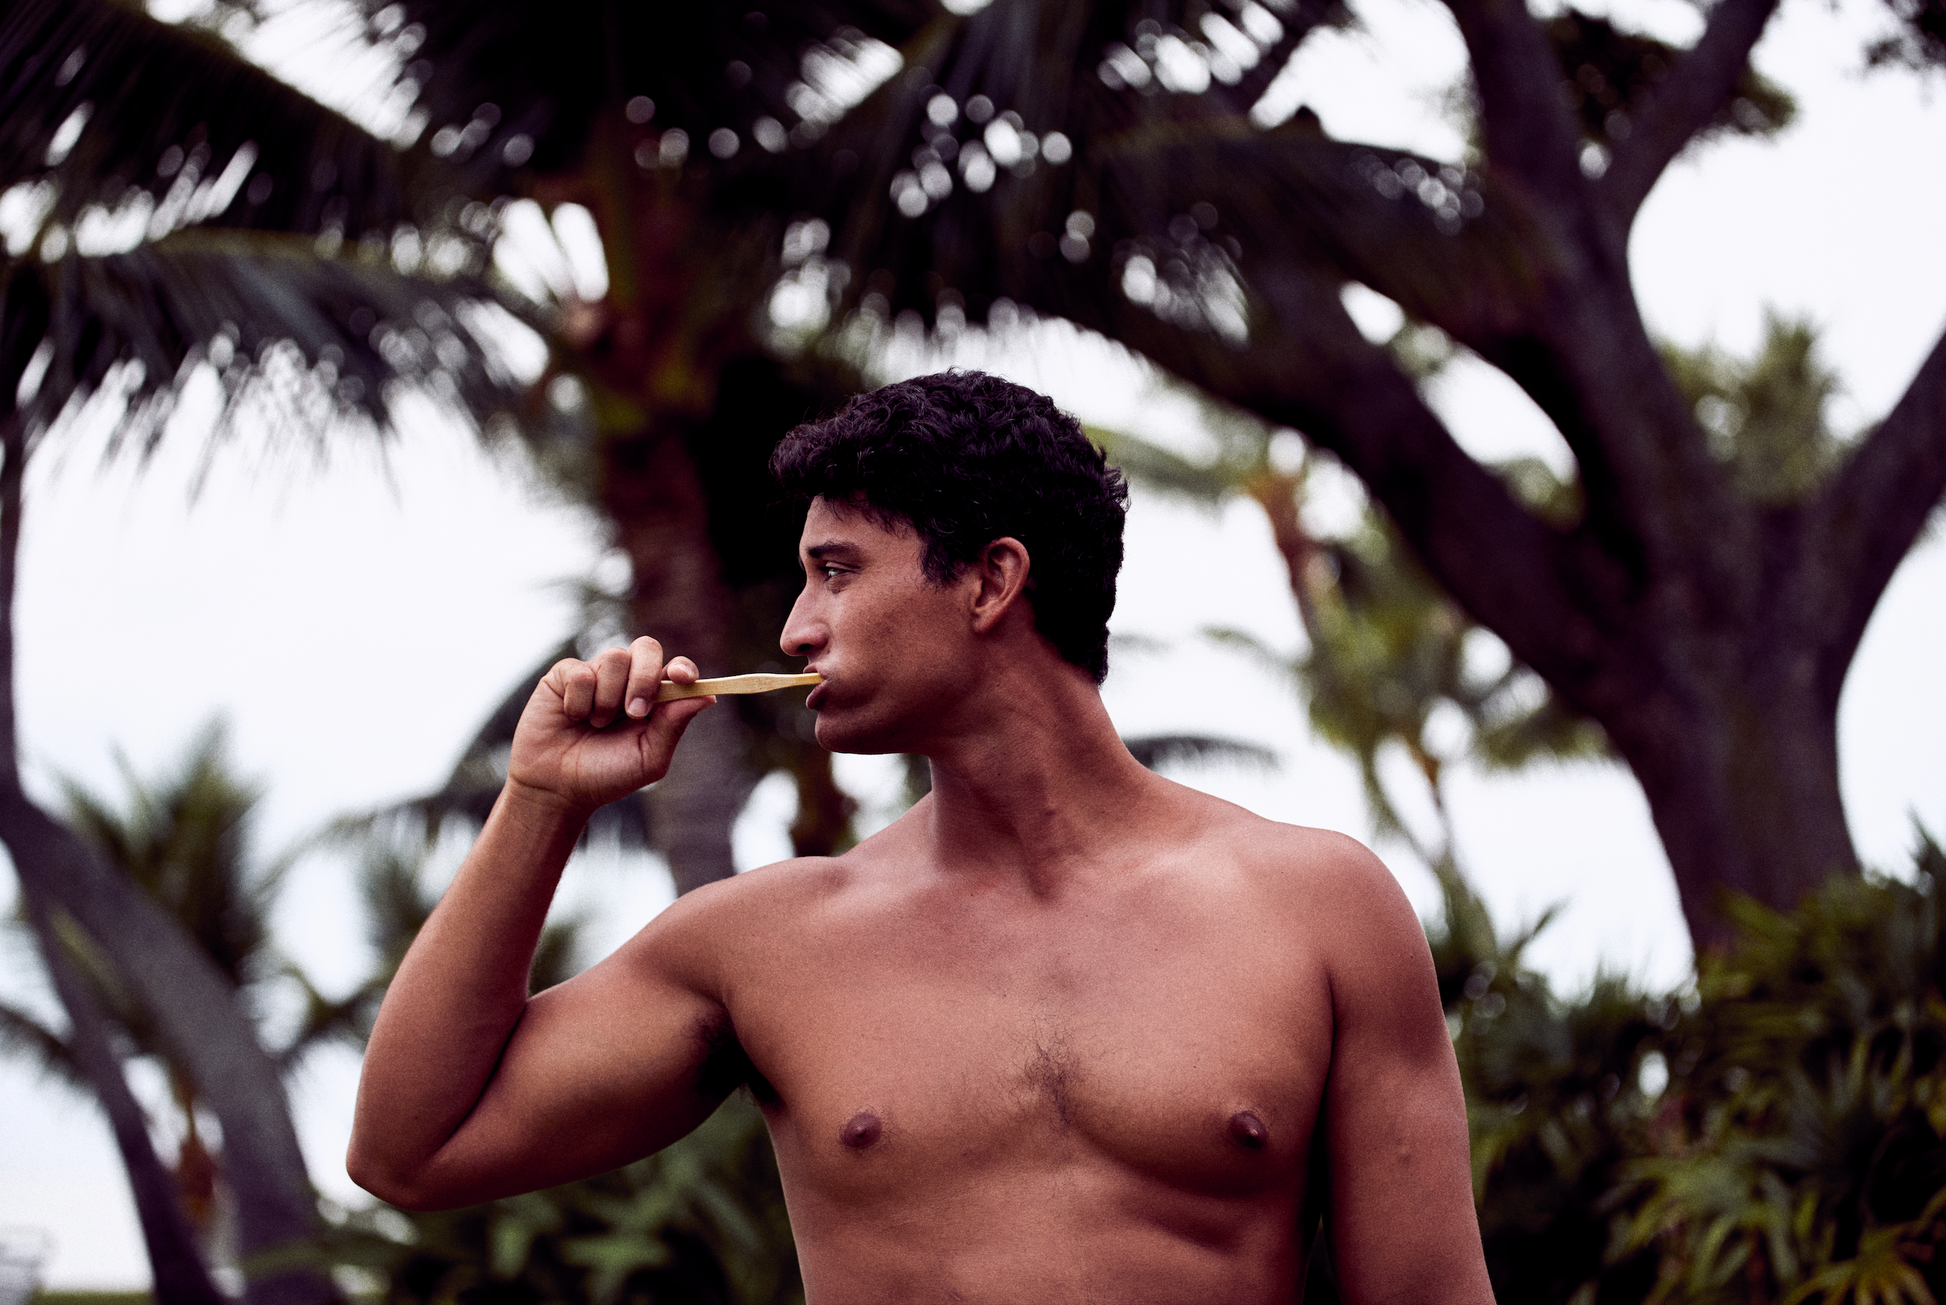 This image shows a shirtless man brushing his teeth with a bamboo toothbrush and US-made fluoride free mint toothpaste tablets